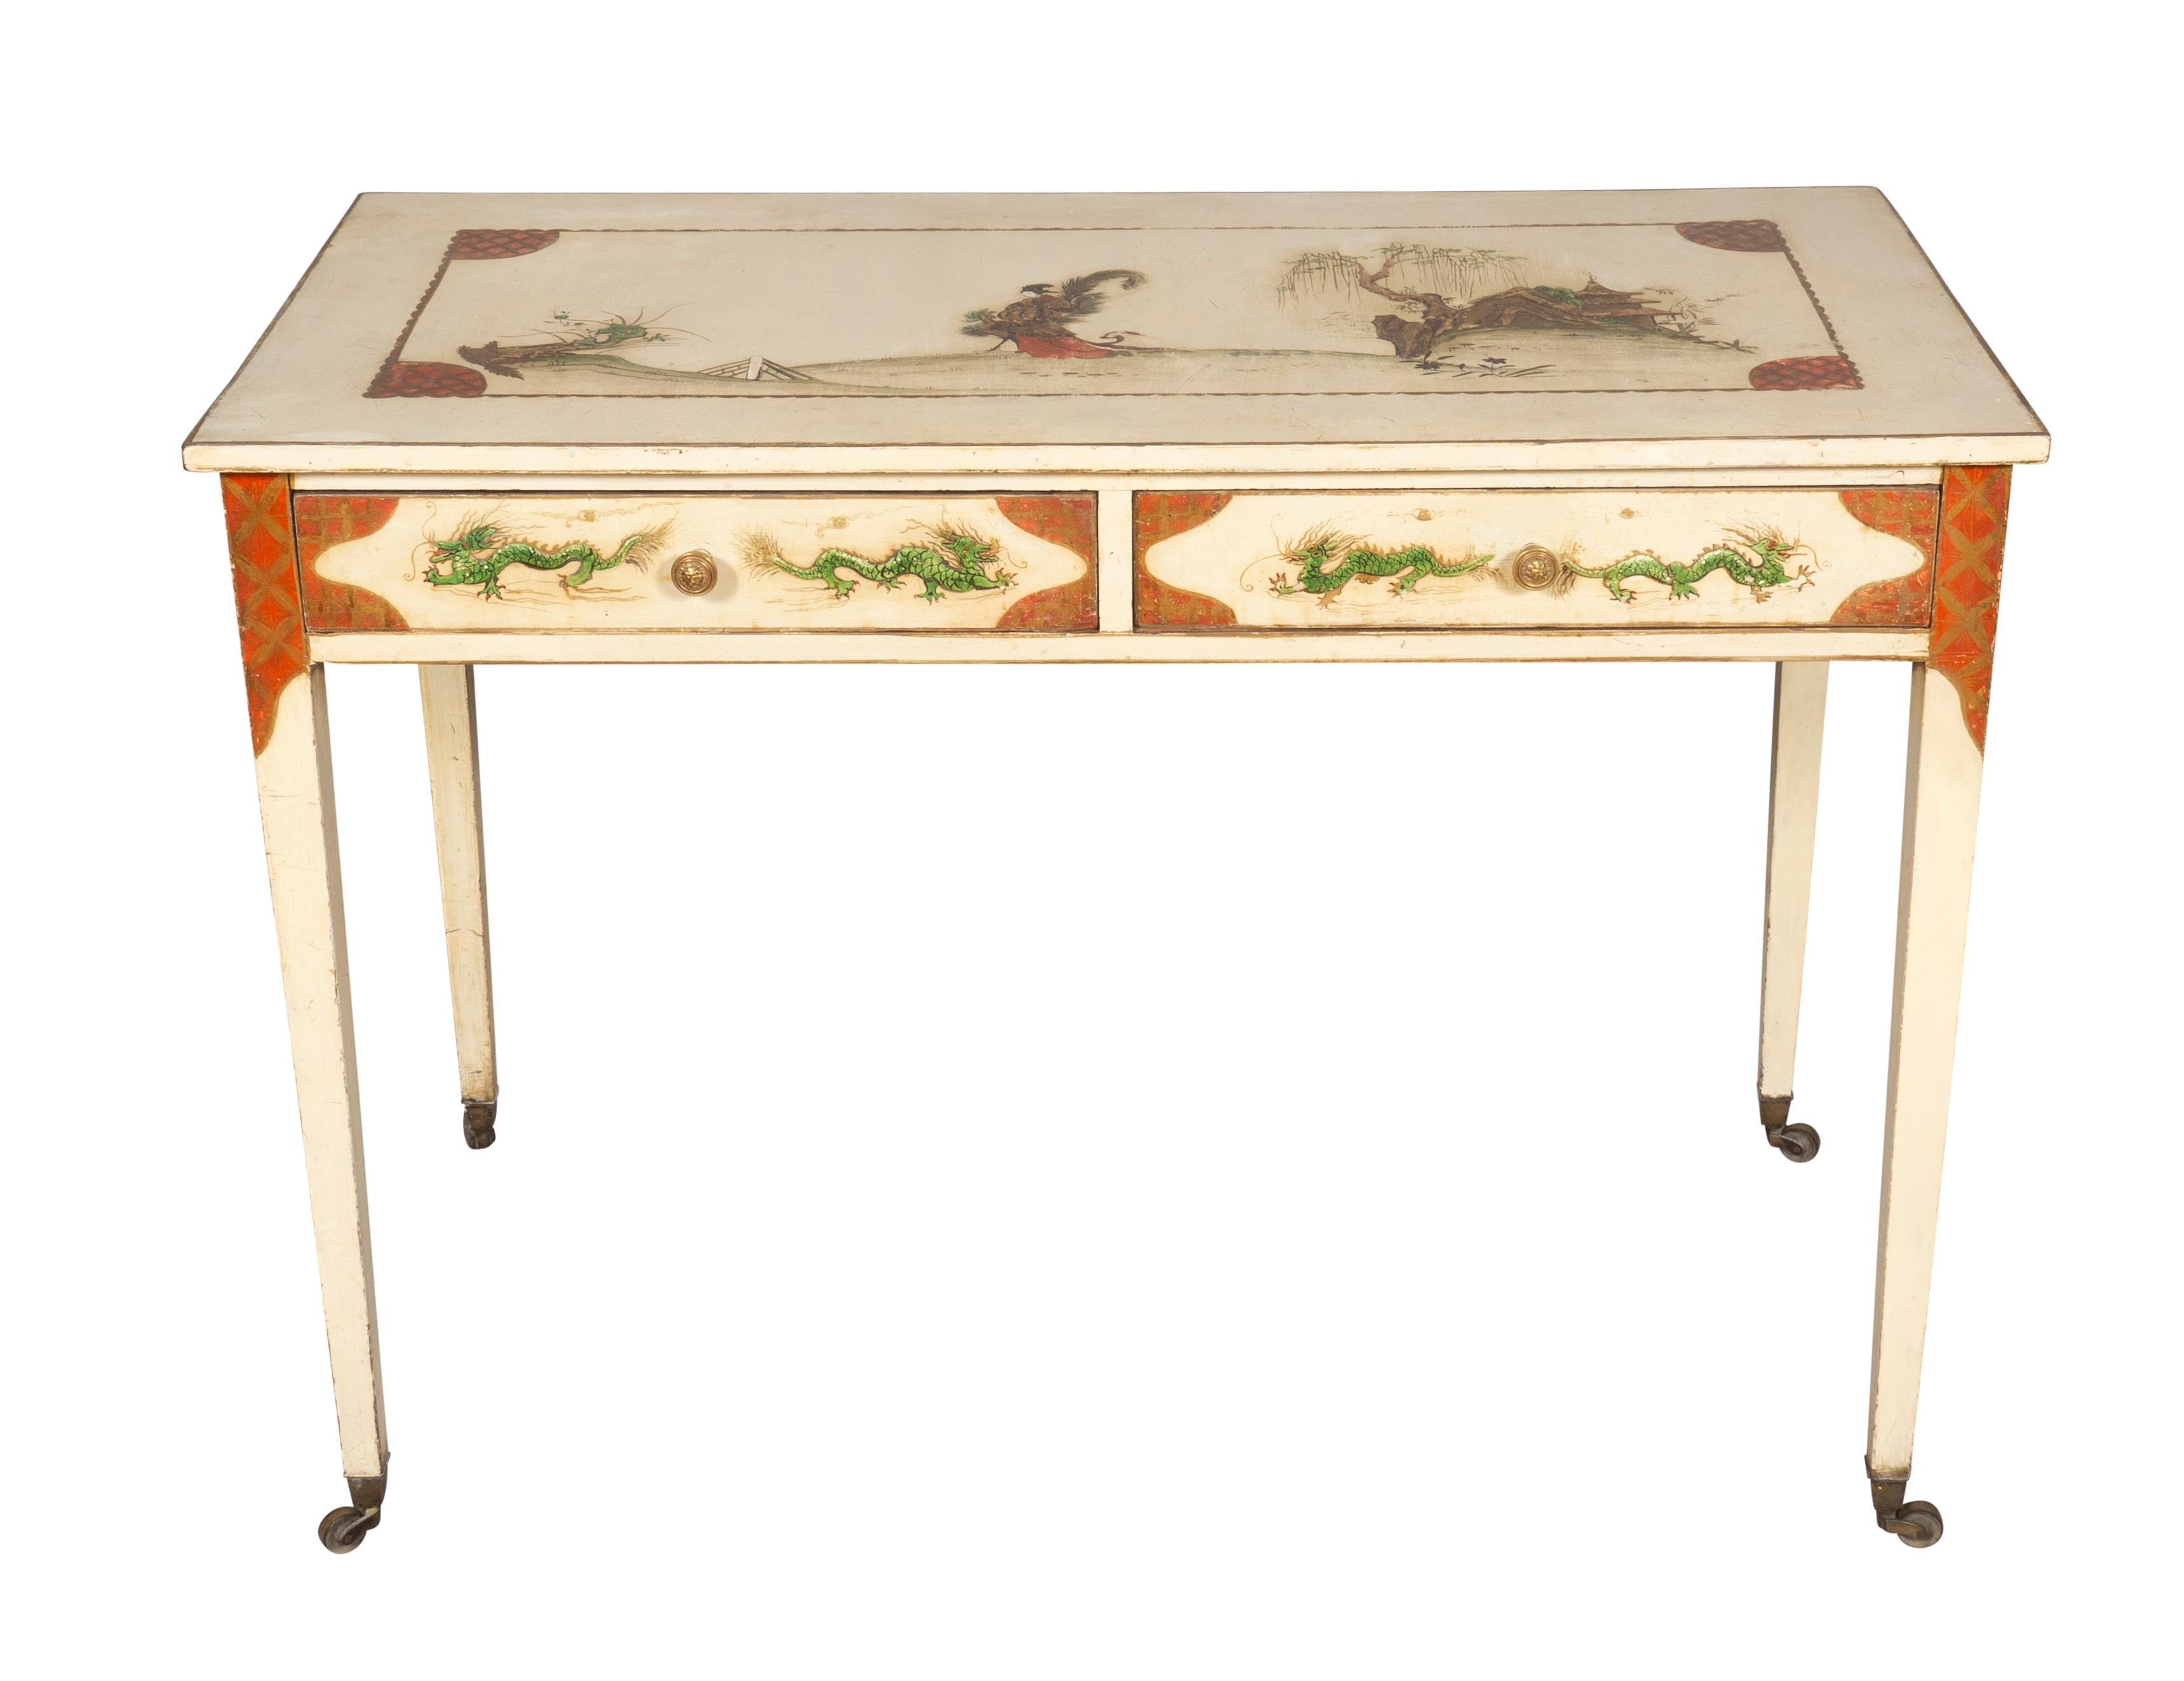 Rectangular top over two drawers raised on square tapered legs and casters. Painted overall with Chinoiserie decoration on a cream colored ground.